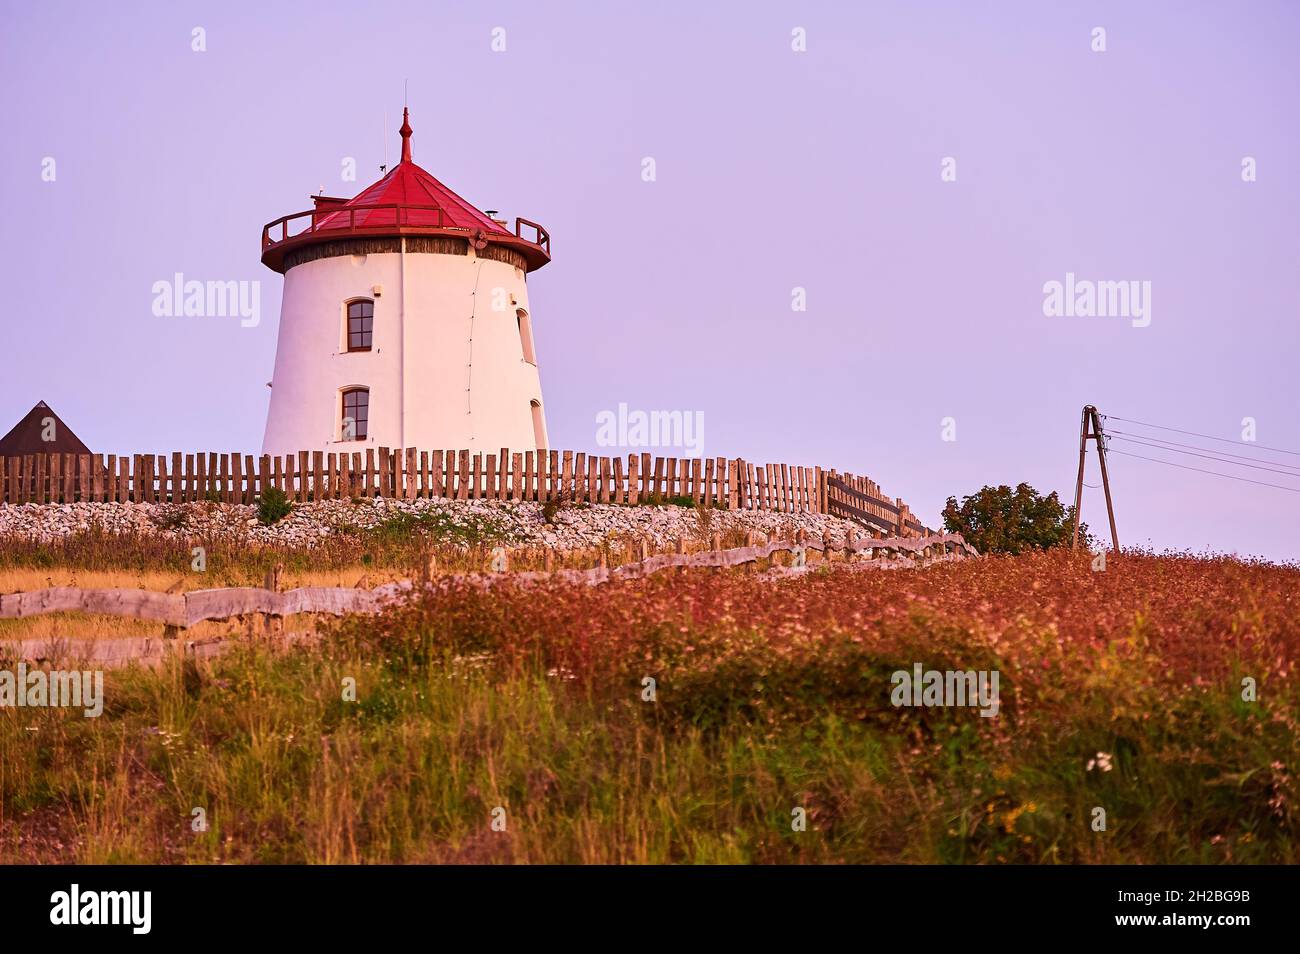 Historic German windmill against the background of a purple sky at dusk Stock Photo